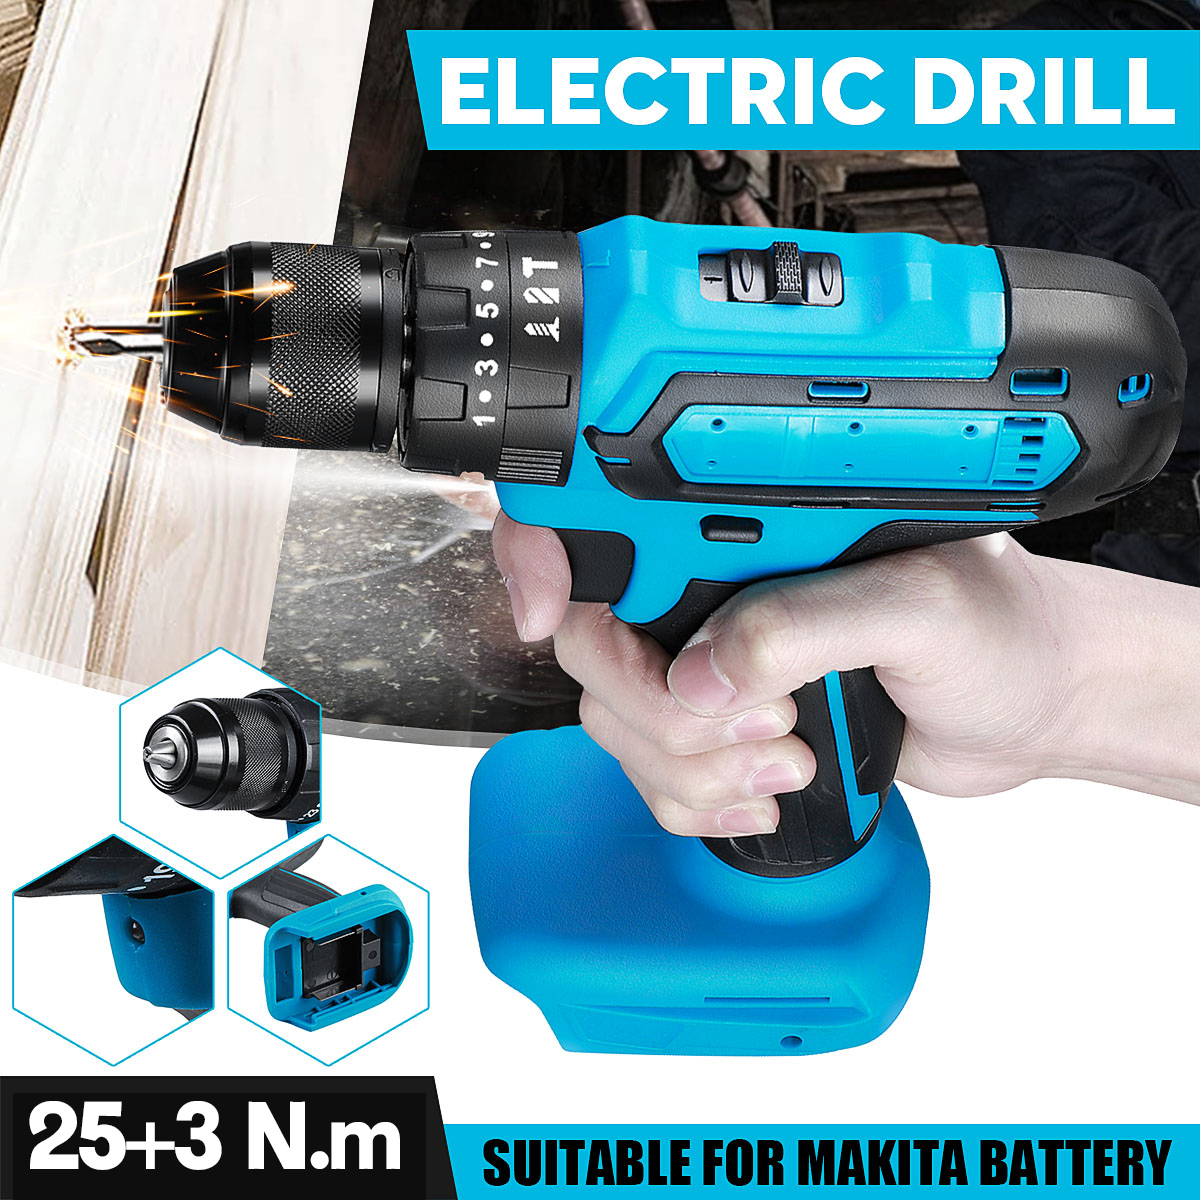 3-In-1-Electric-Drill-Screwdriver-Dual-Speed-Cordless-Drill-Tool-for-Makita-Battery-1797389-1